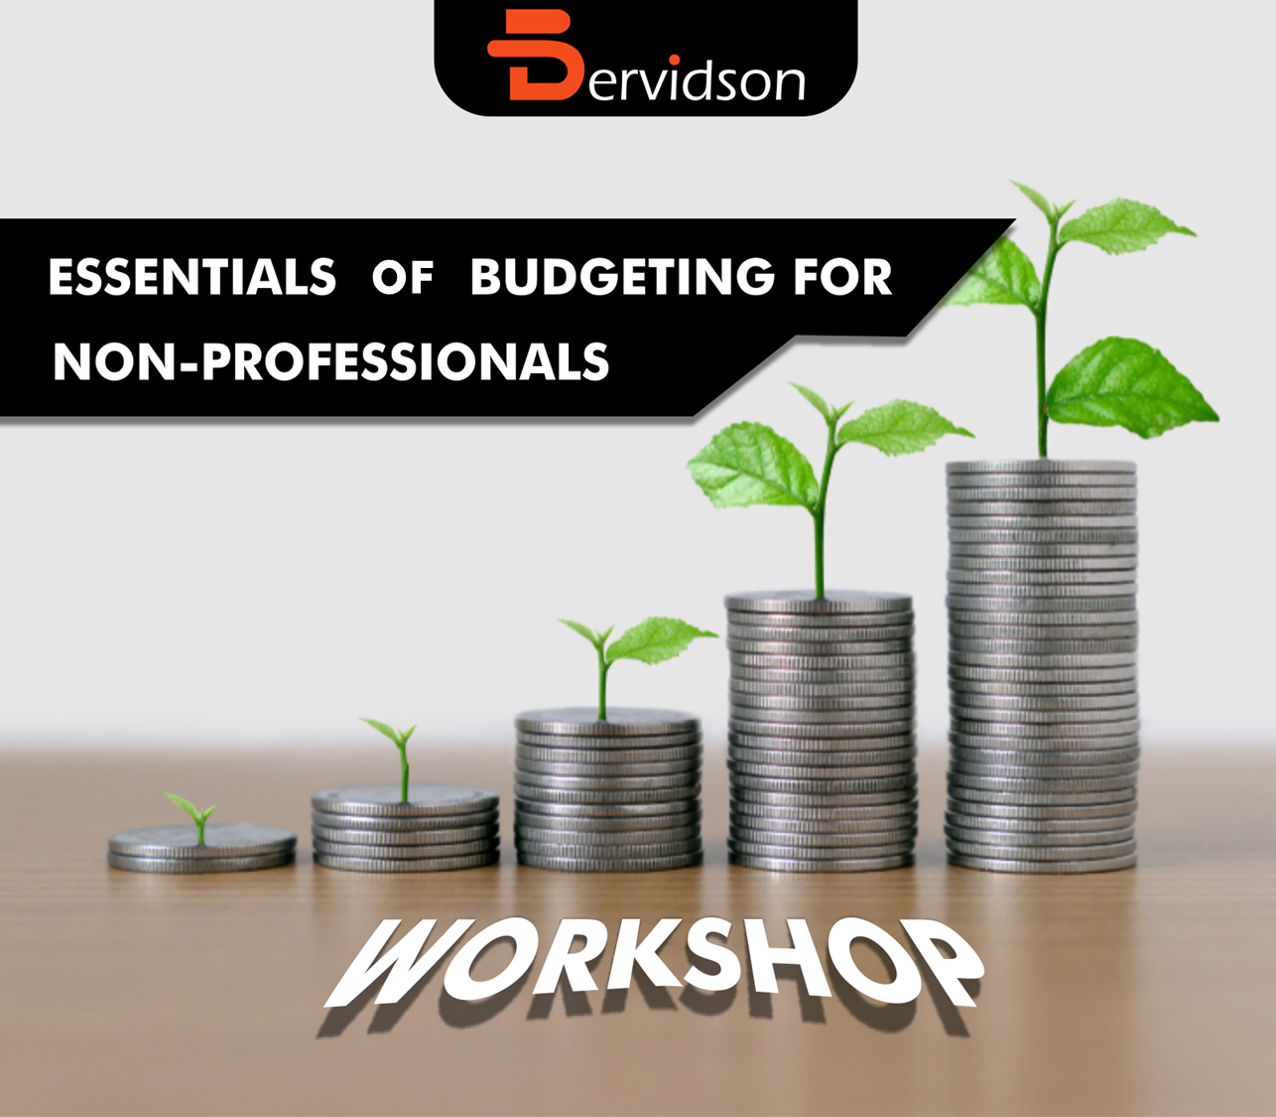 Essentials Of Budgeting For Non-Professionals Workshop